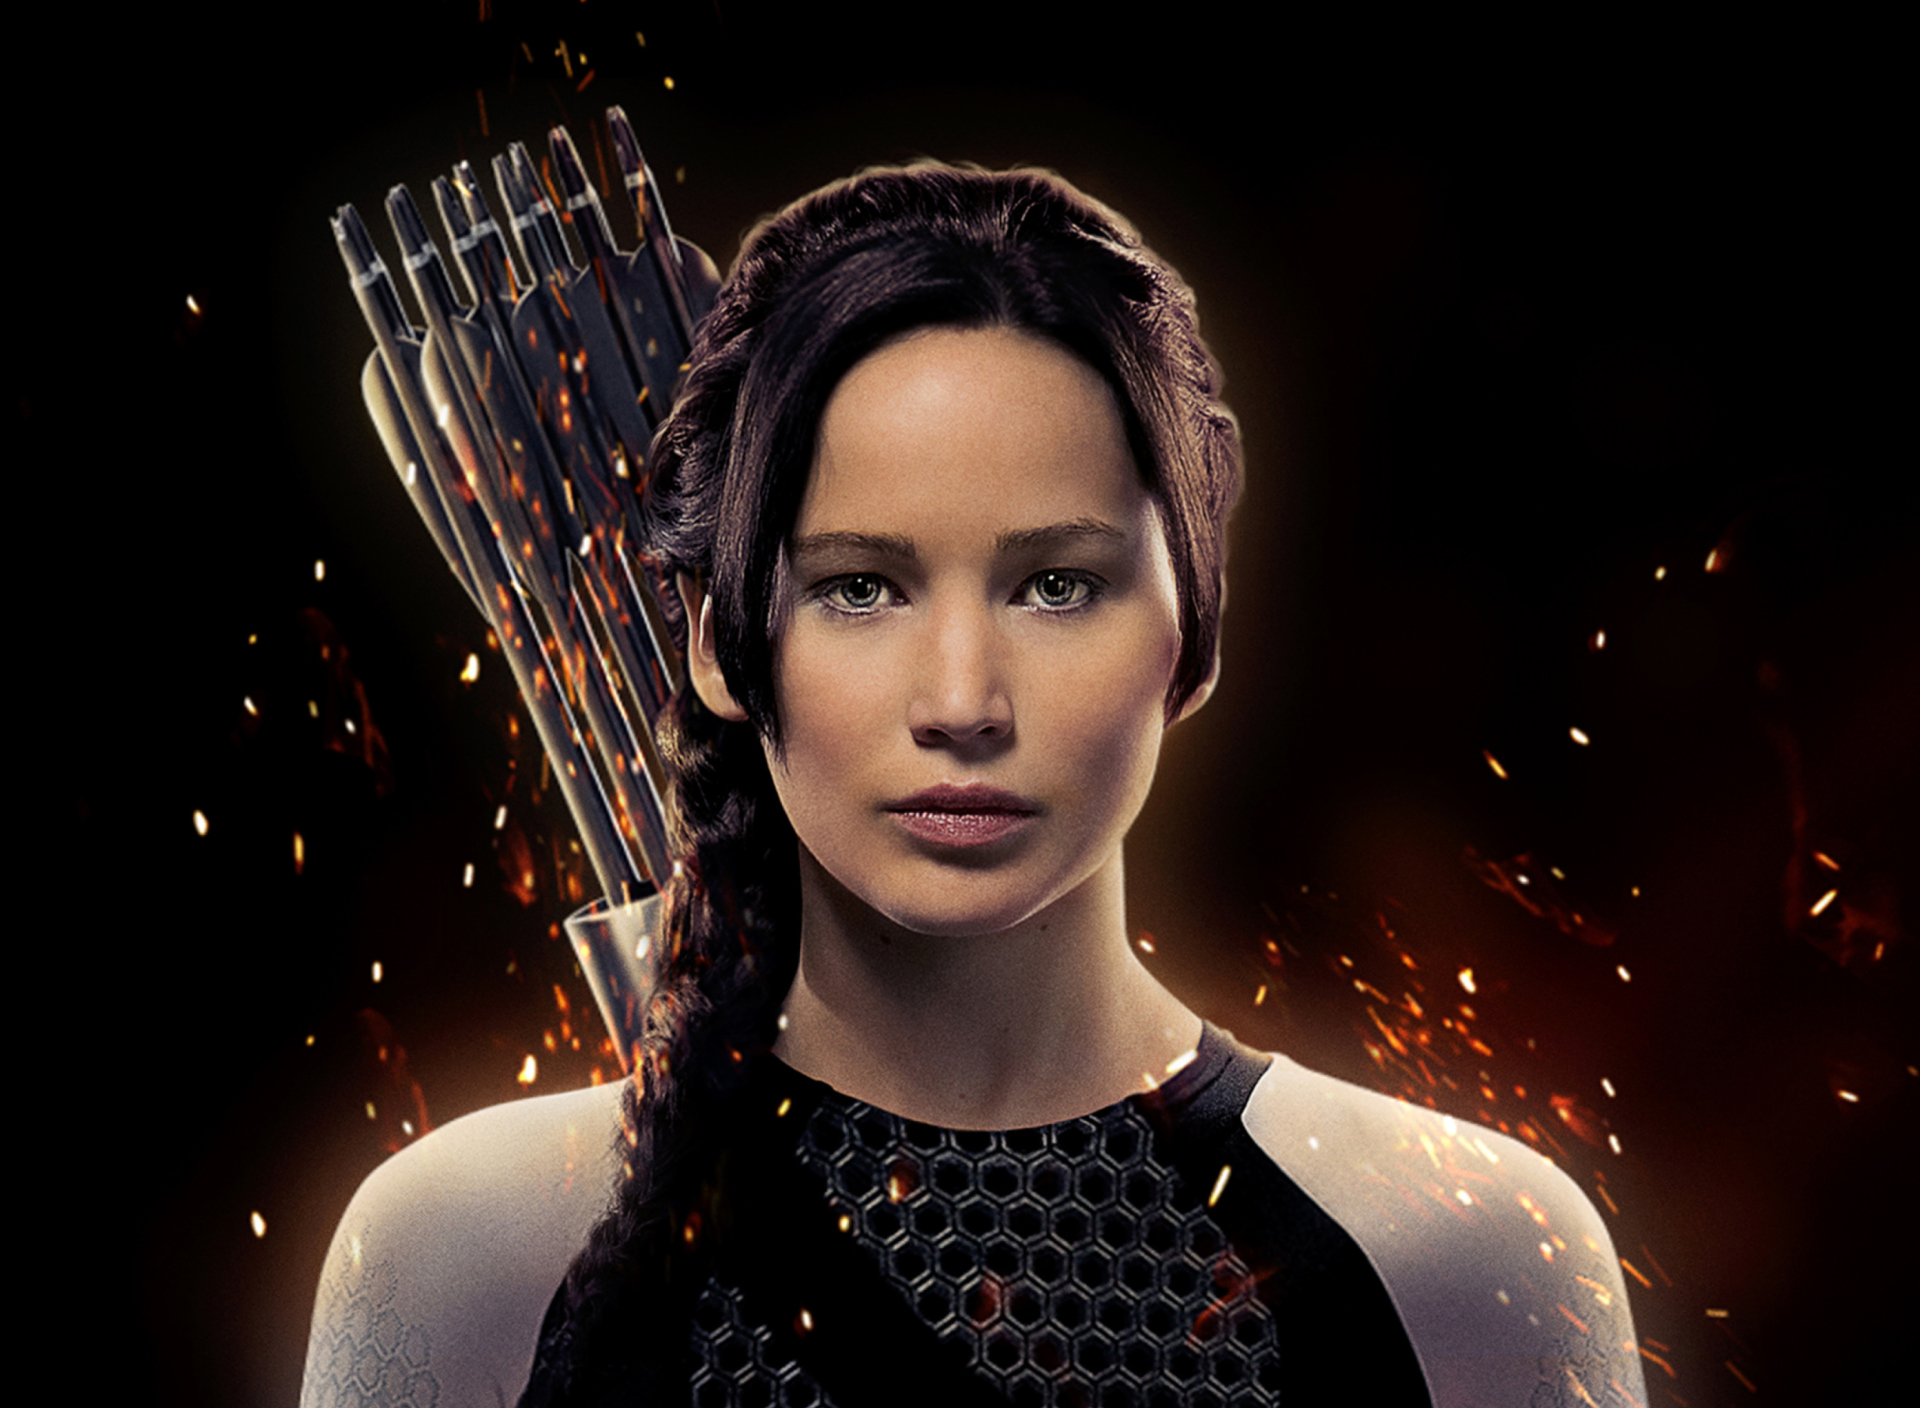 The Hunger Games: Catching Fire wallpaper 1920x1408